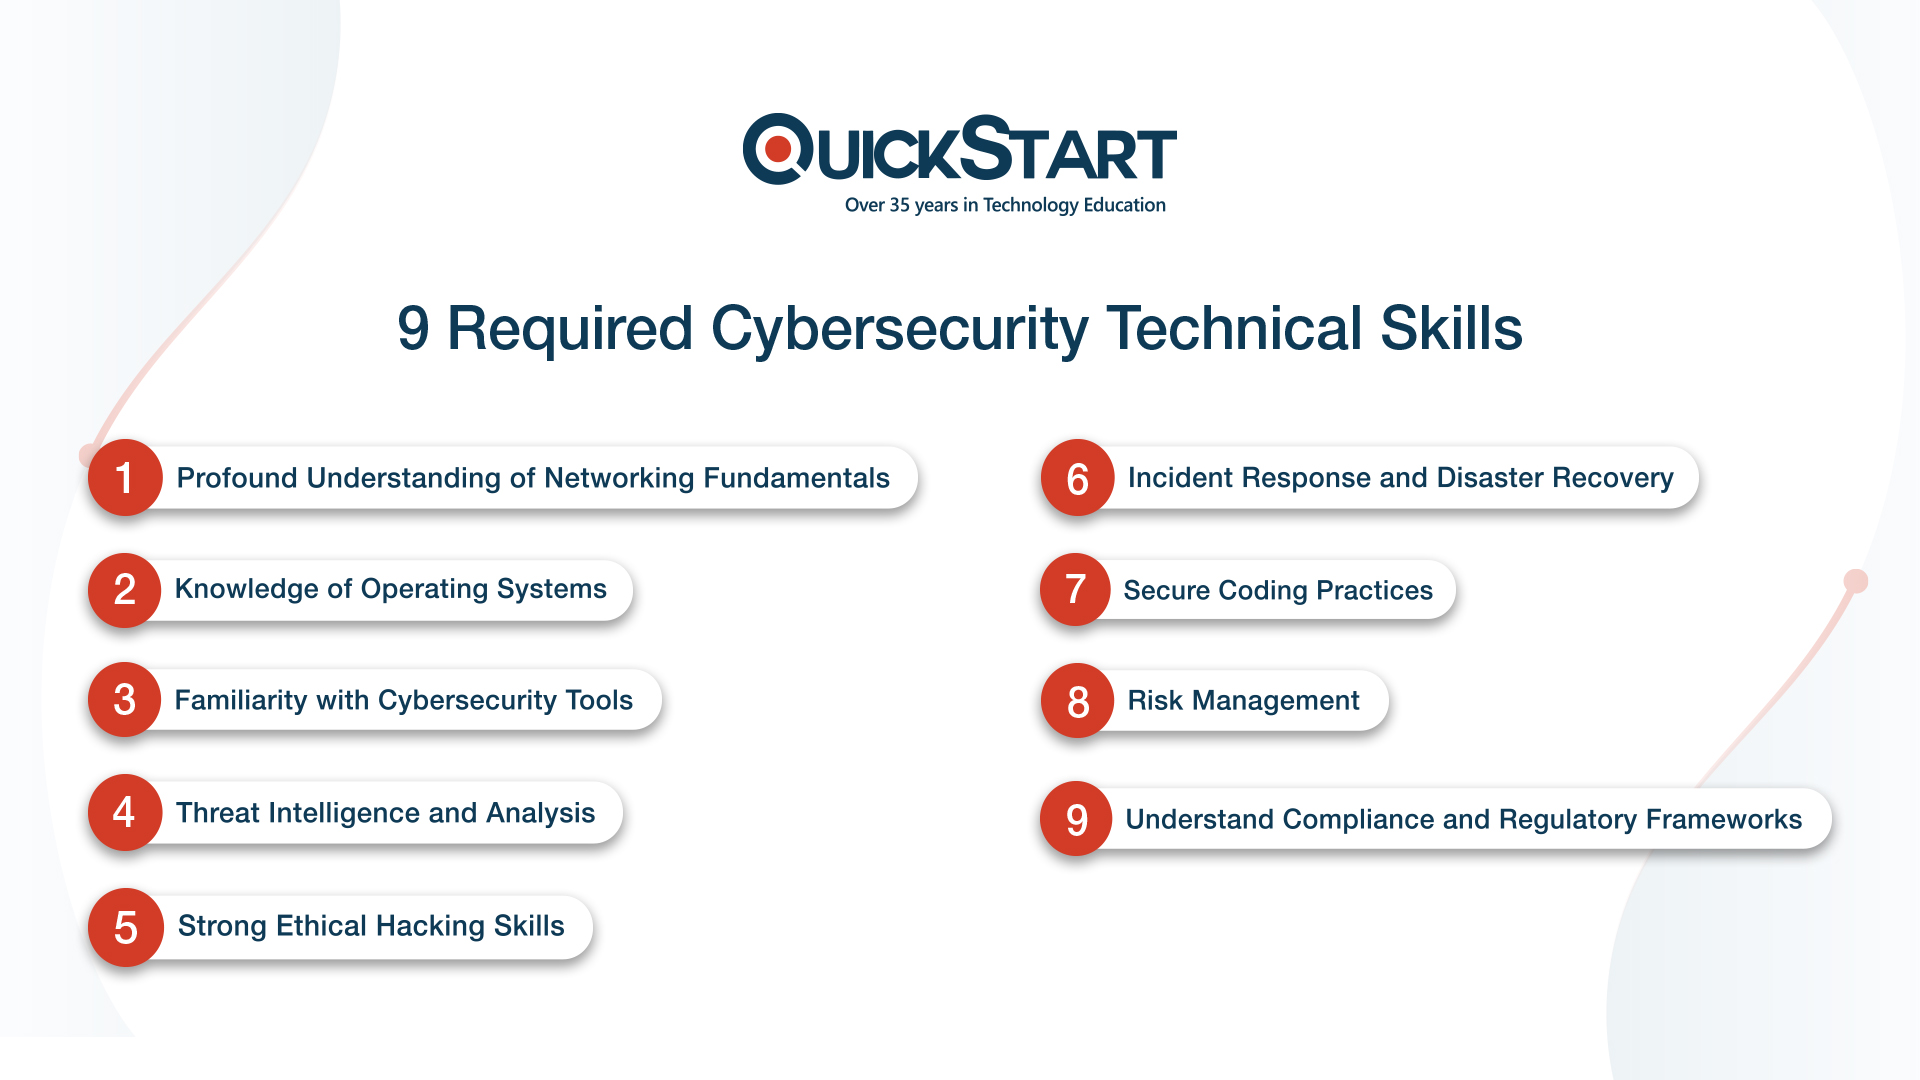 9 required cybersecurity technical skills